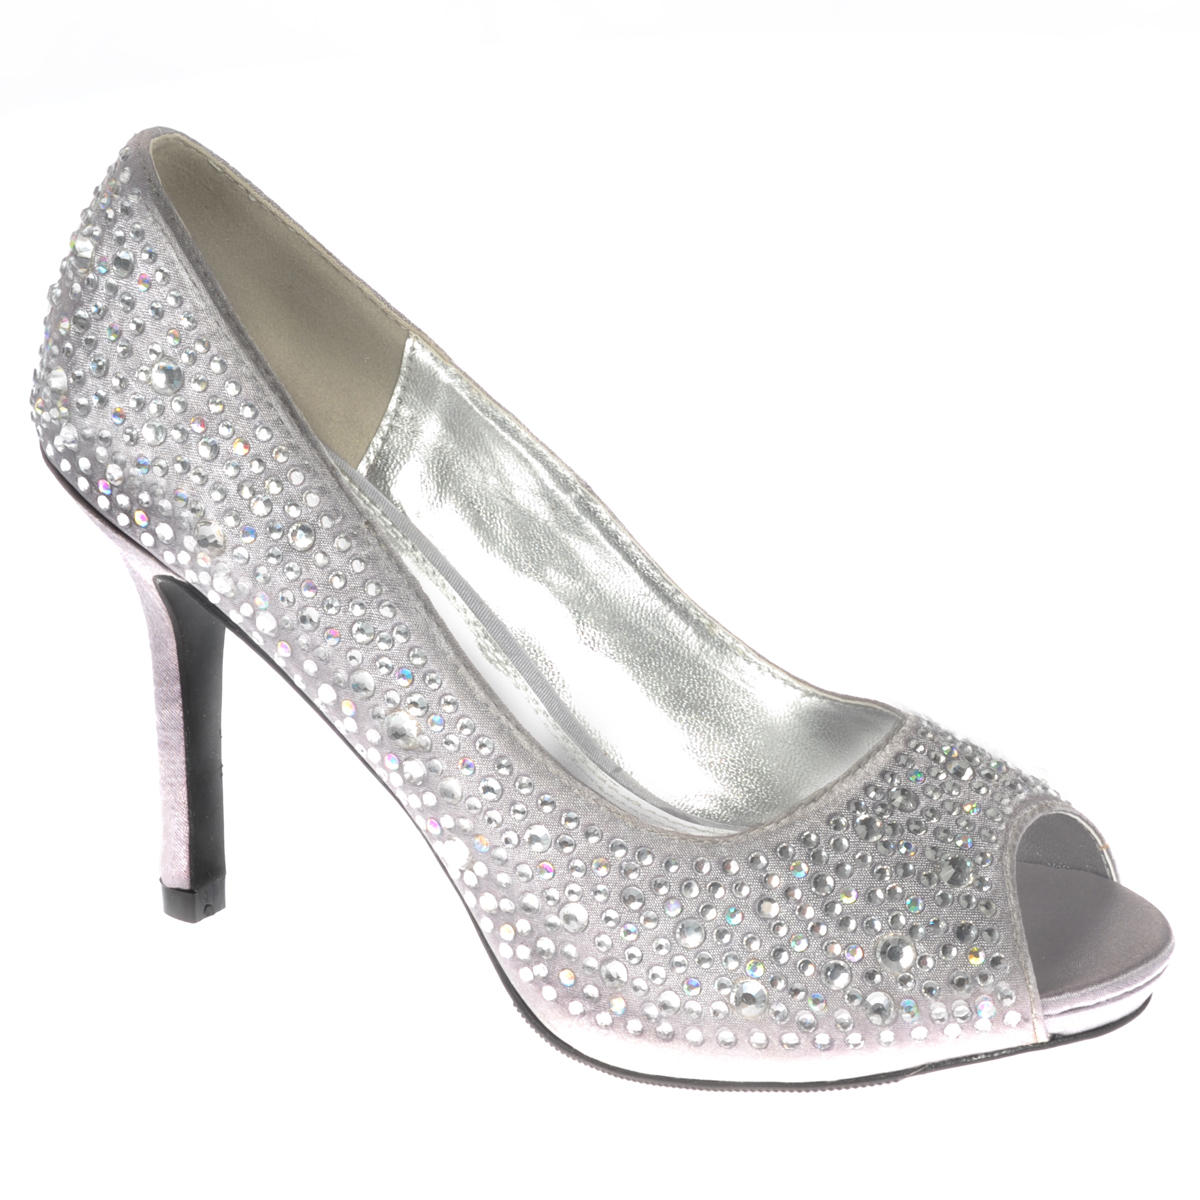 Your Party Shoes - Heels, Clutch Bags, & More | Viper Apparel Your ...